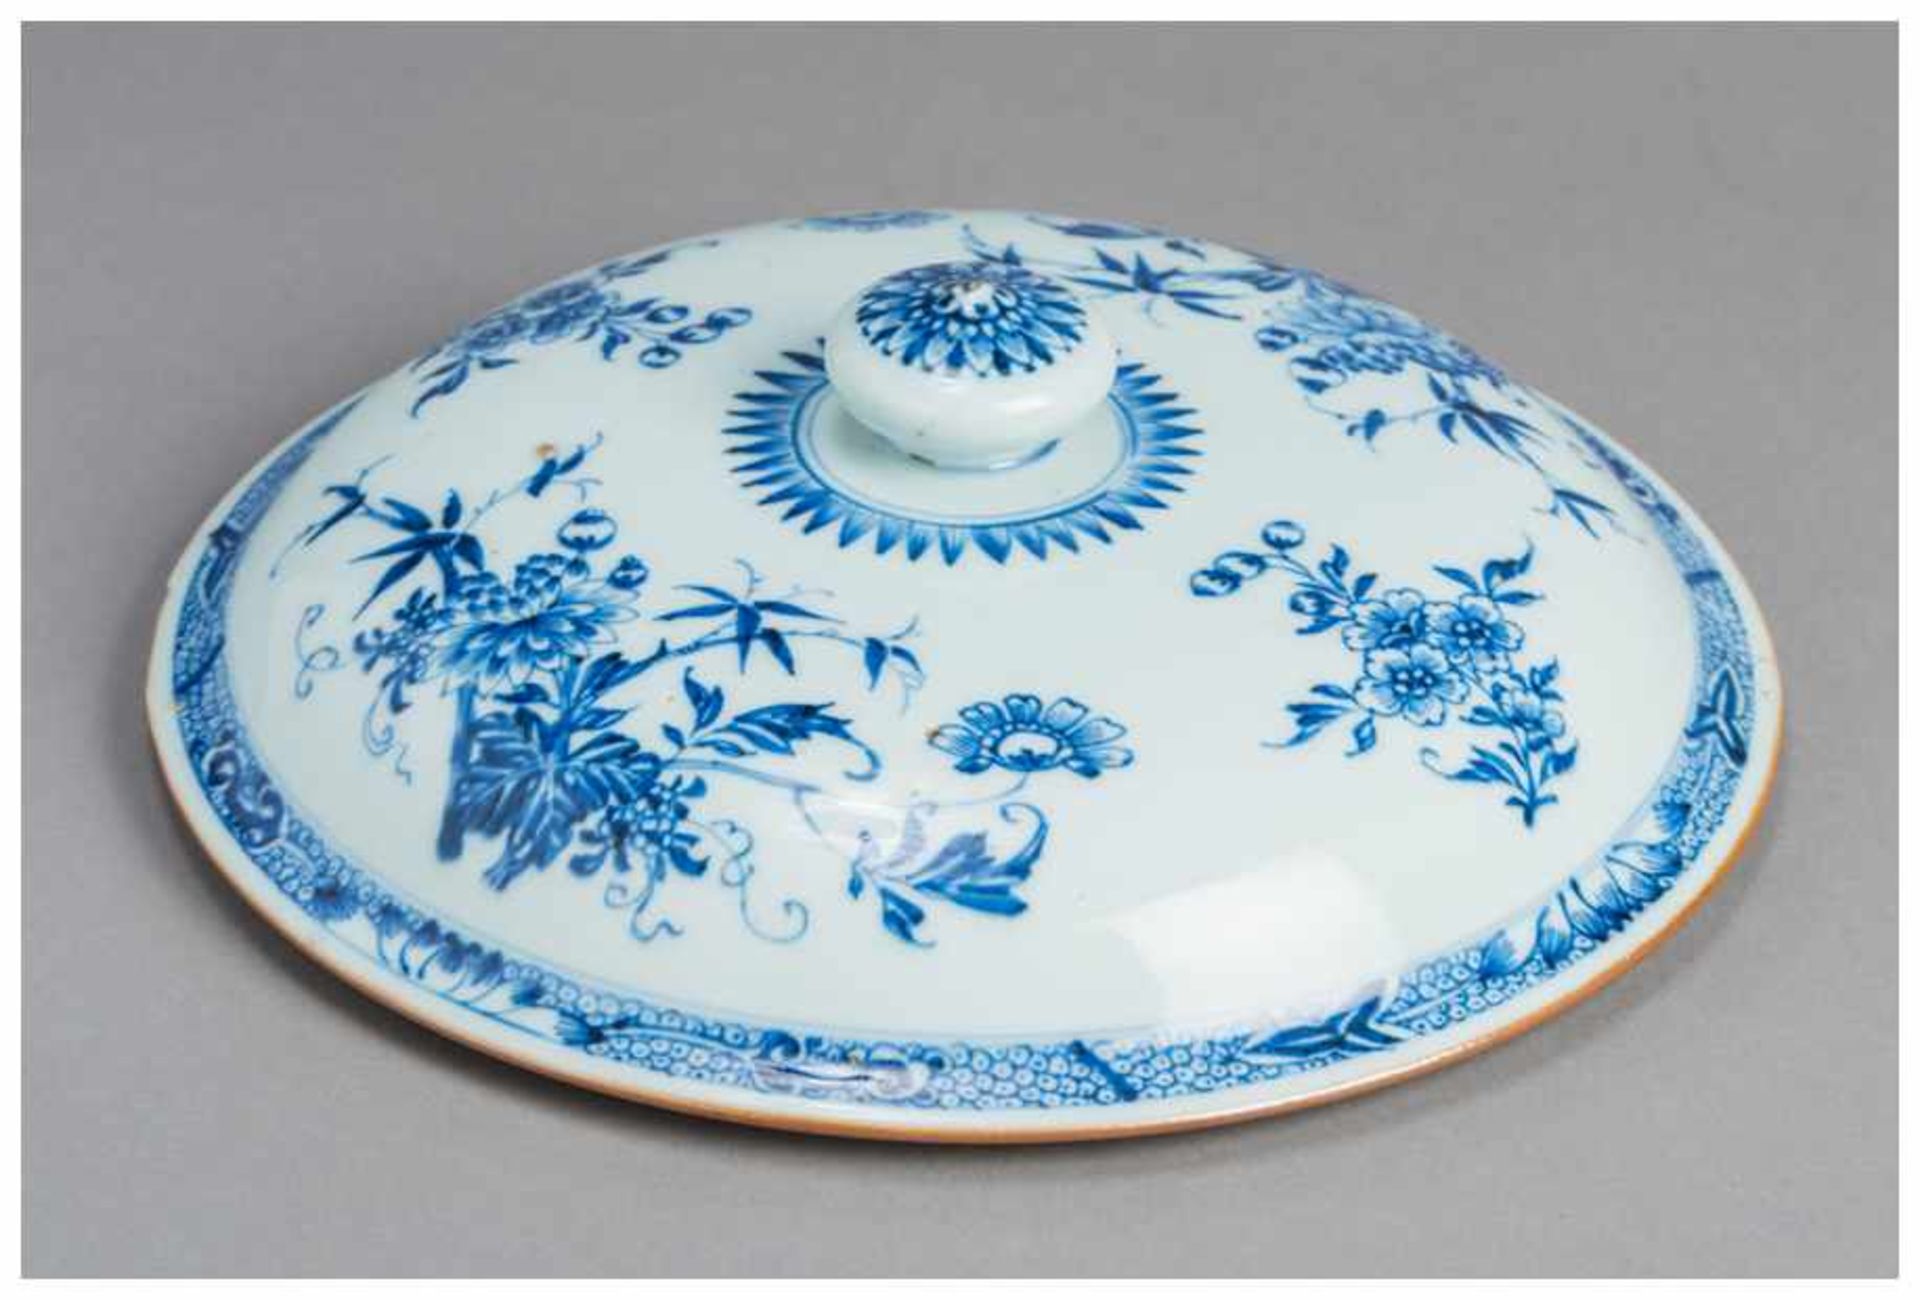 A FINE PORCELAIN LID FOR A LARGE VASE Porcelain with underglaze blue painting. China, Qing dynastyAn - Image 3 of 3